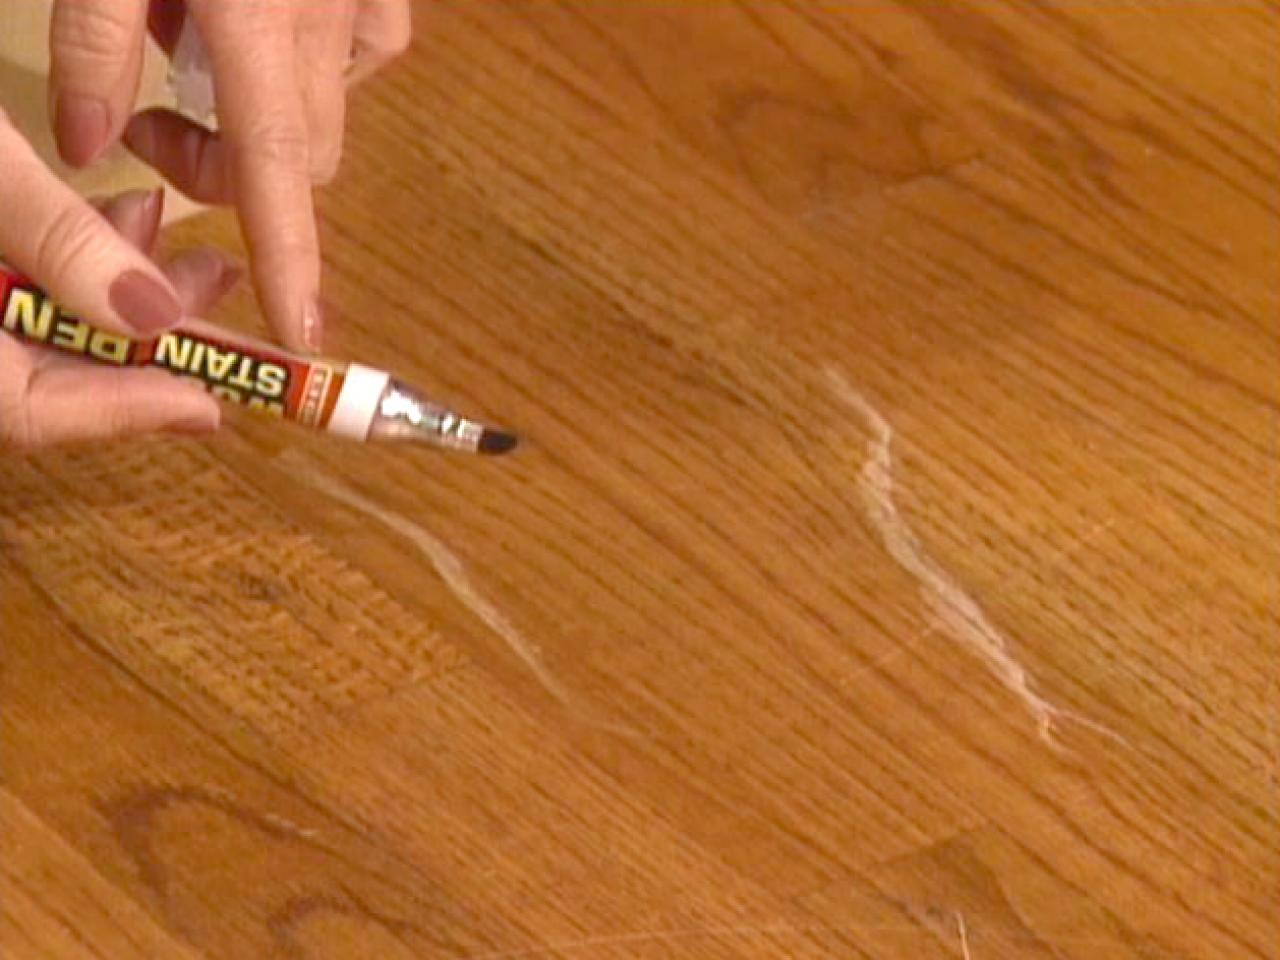 How To Touch Up Wood Floors Tos Diy, How To Get Scuffs Out Of Vinyl Flooring